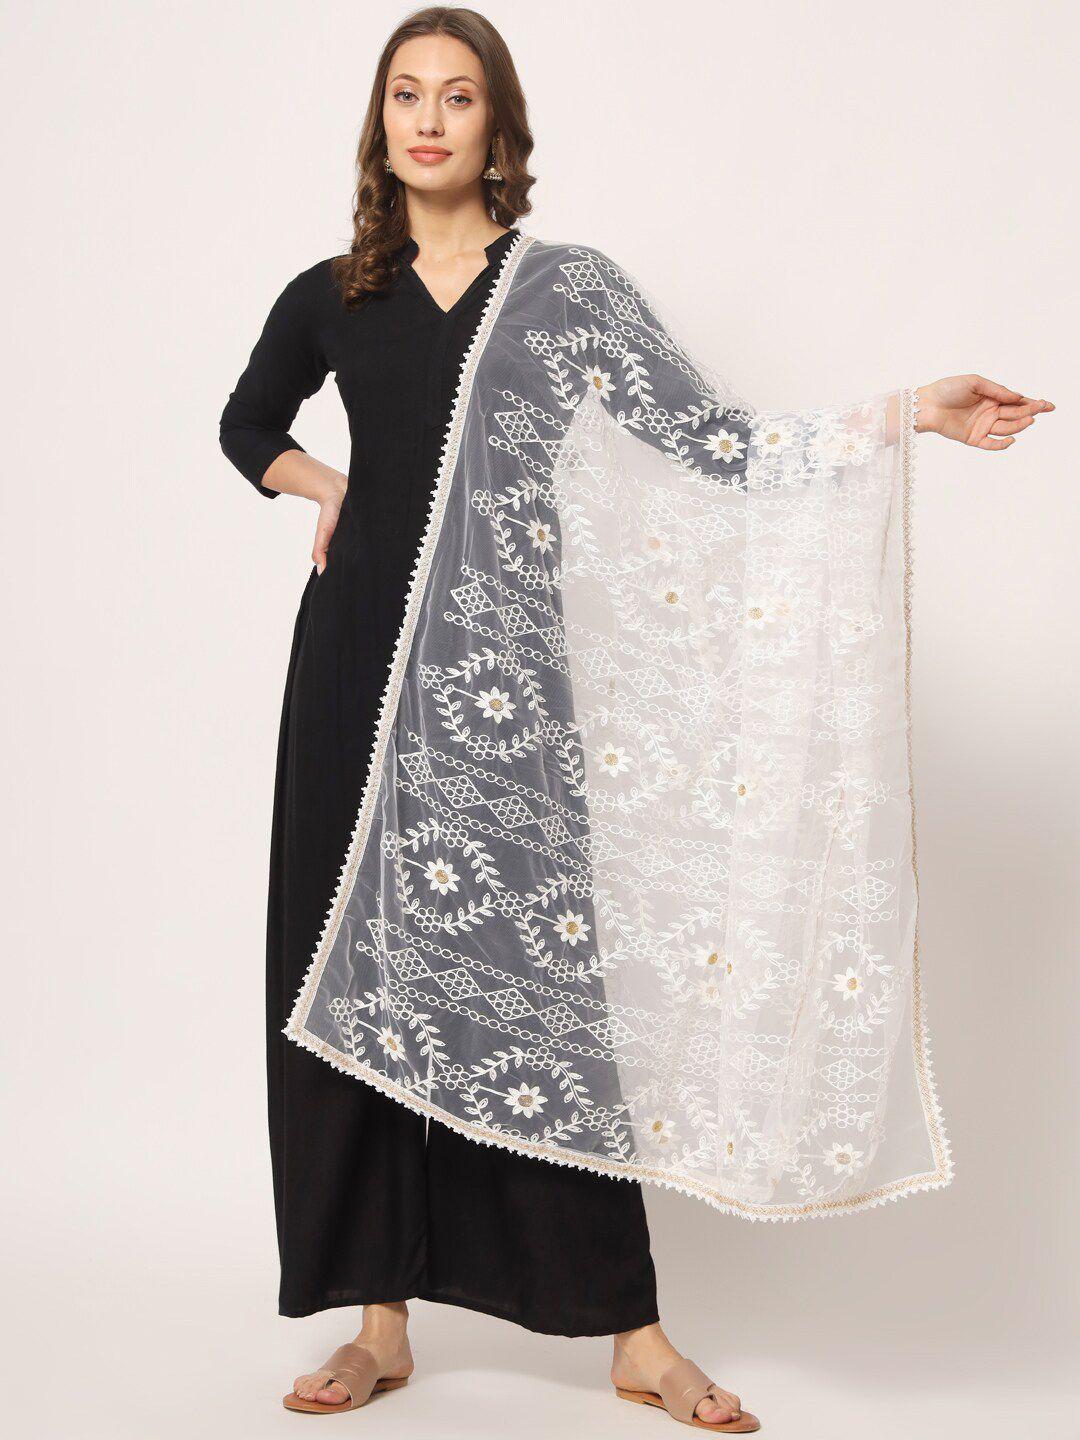 Zamour Embroidered Net Dupatta